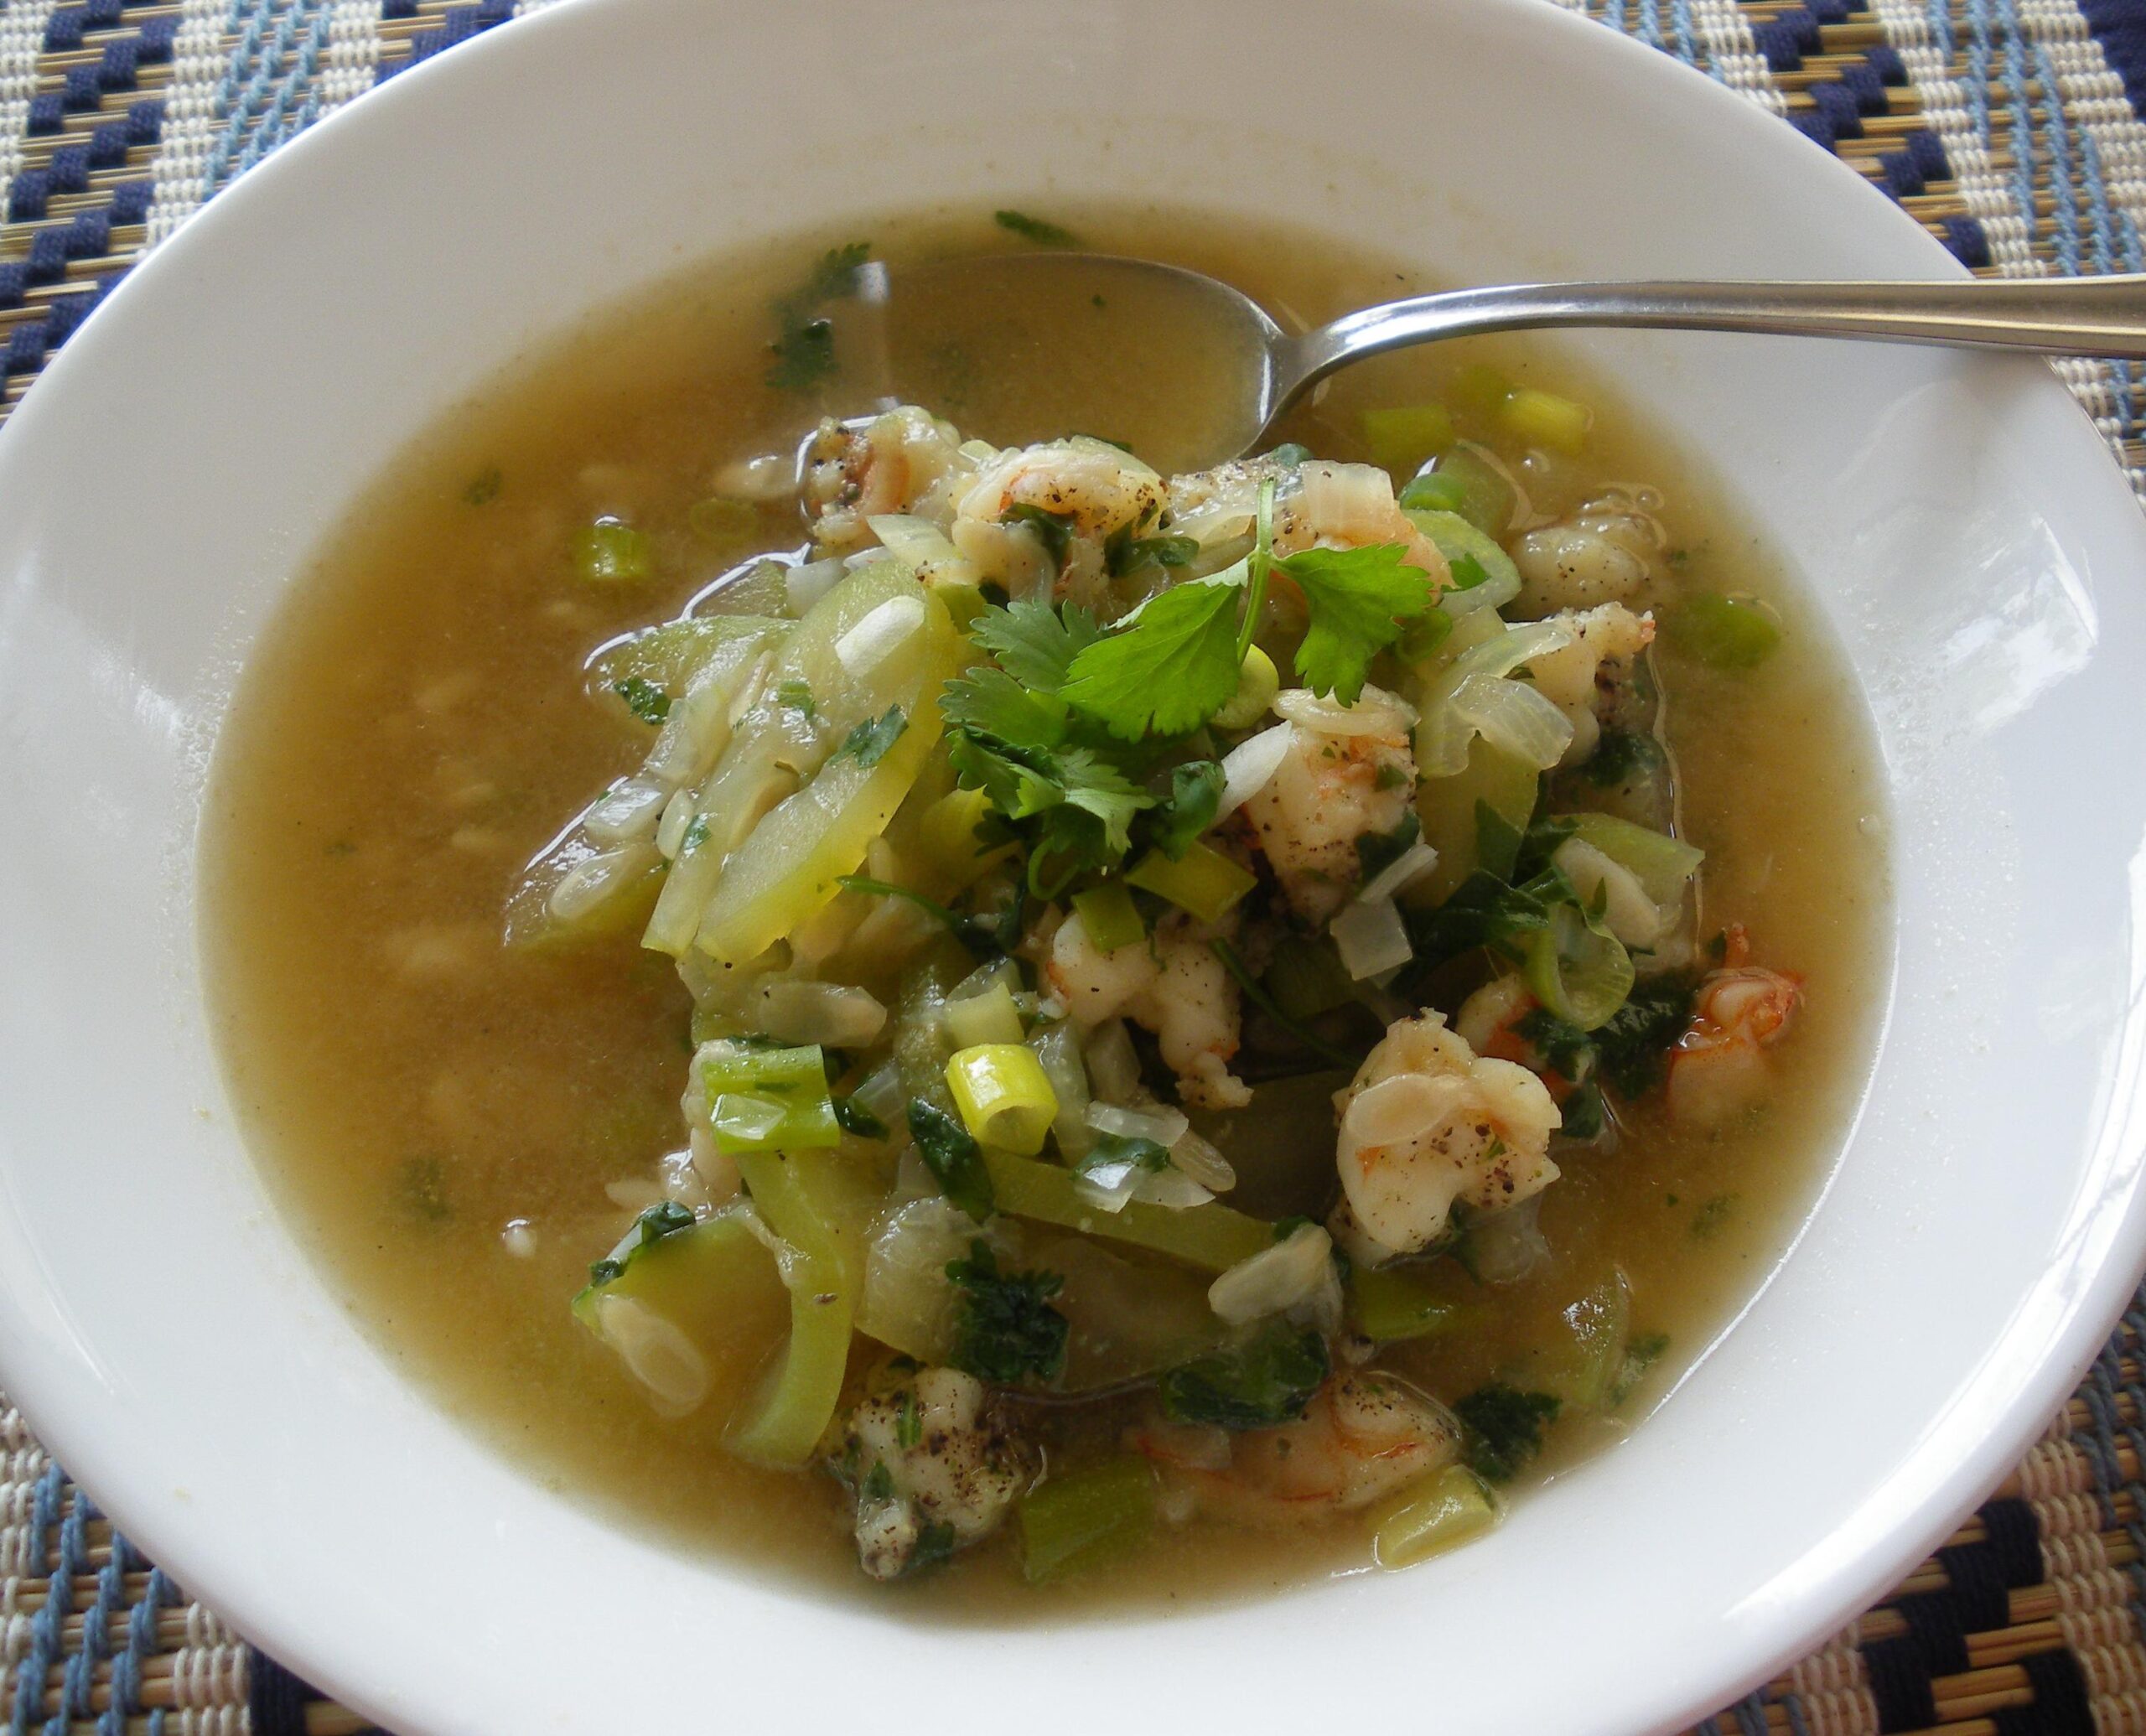 Try This Delicious Canh Bau Tom Recipe Today!